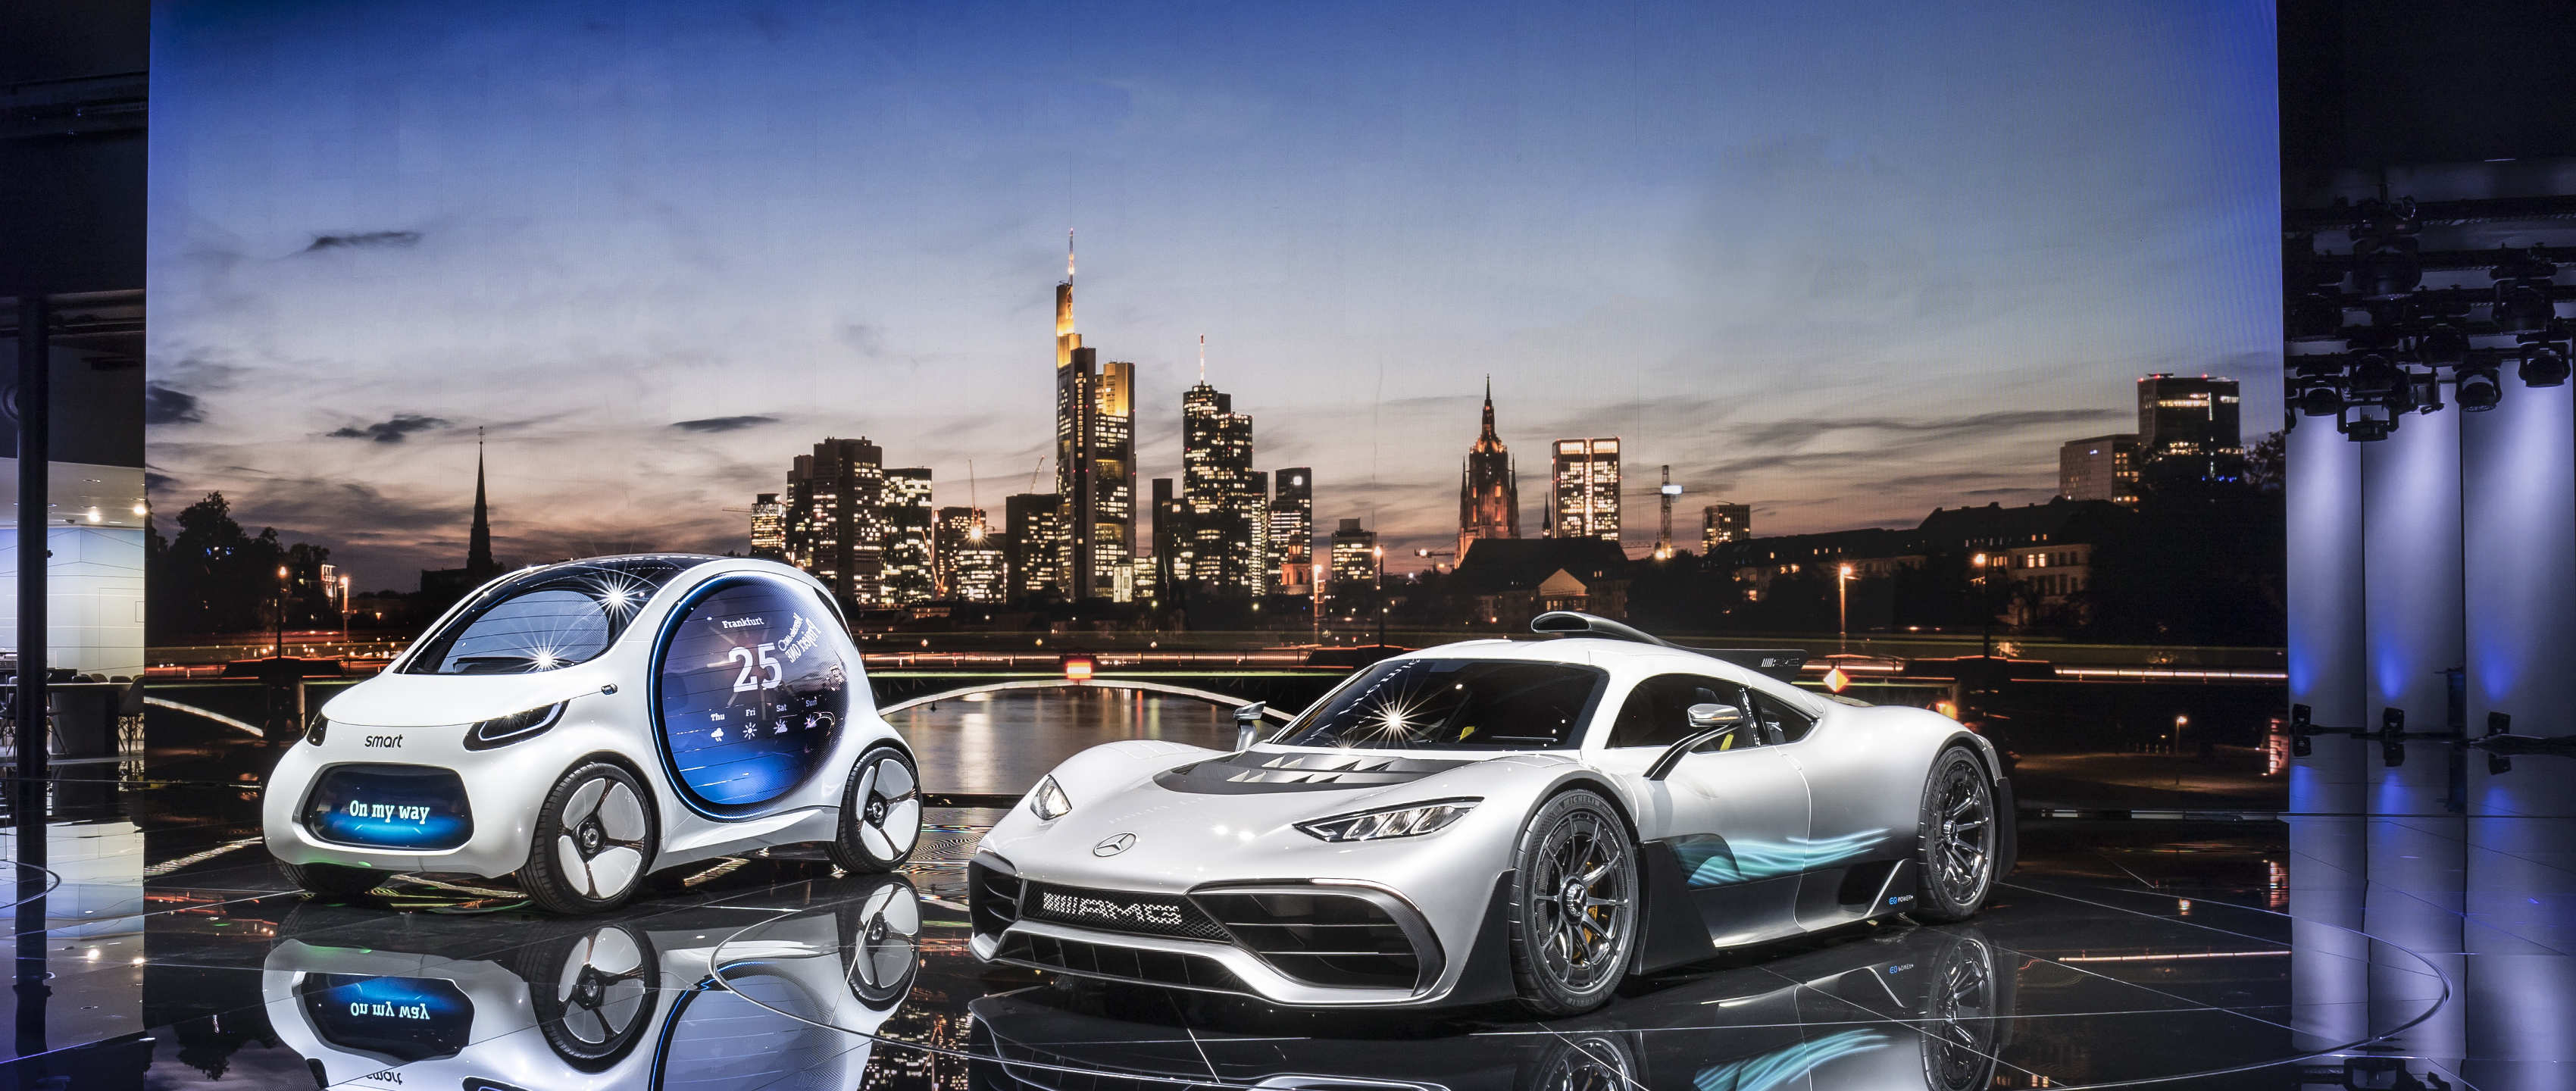 Mercedes-Benz Cars on the eve of the IAA.